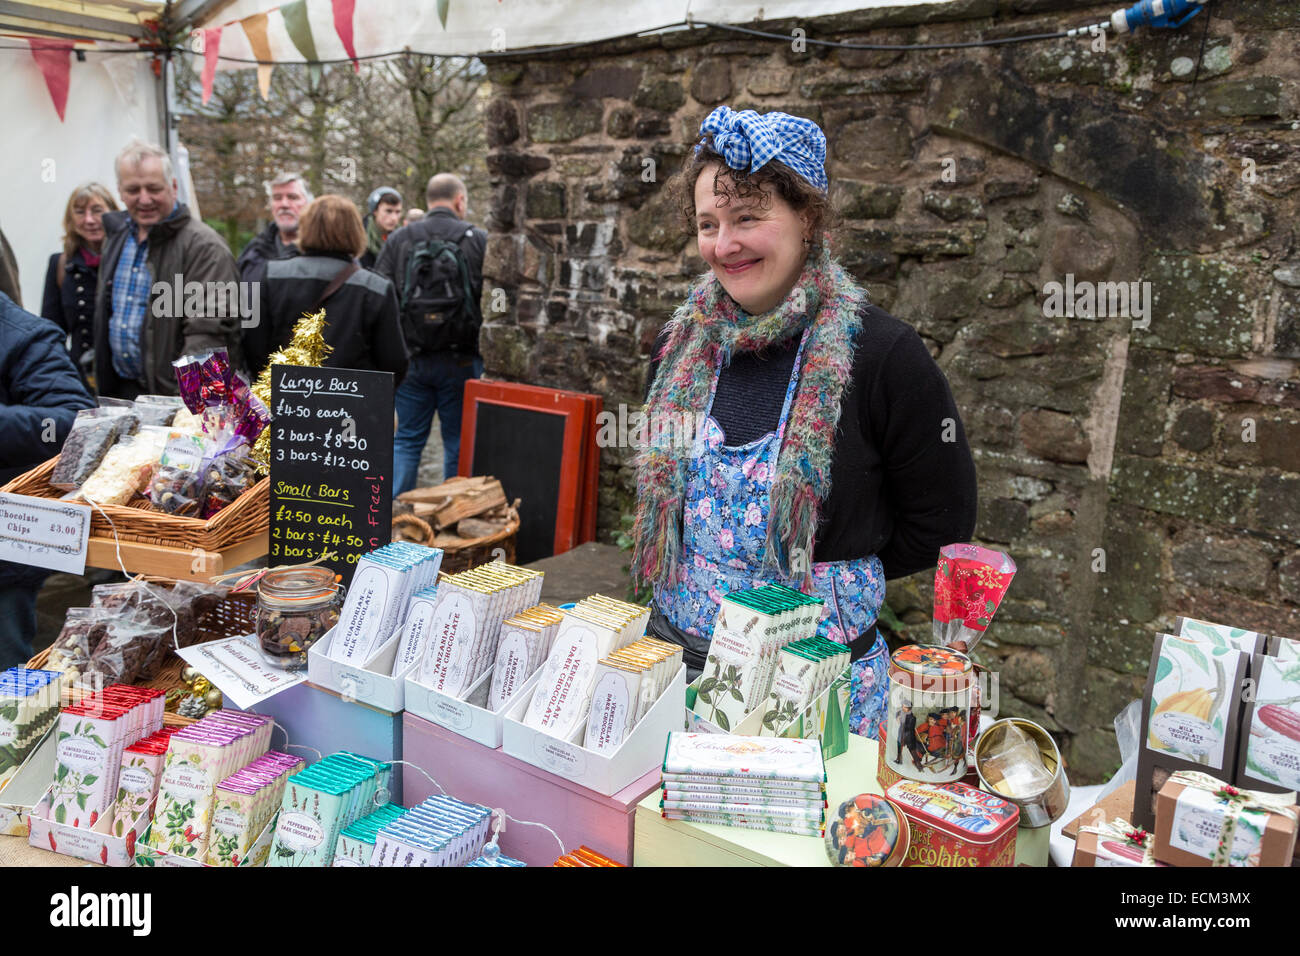 Market stall selling chocolate at the Christmas Food Festival, Abergavenny, Wales, UK Stock Photo